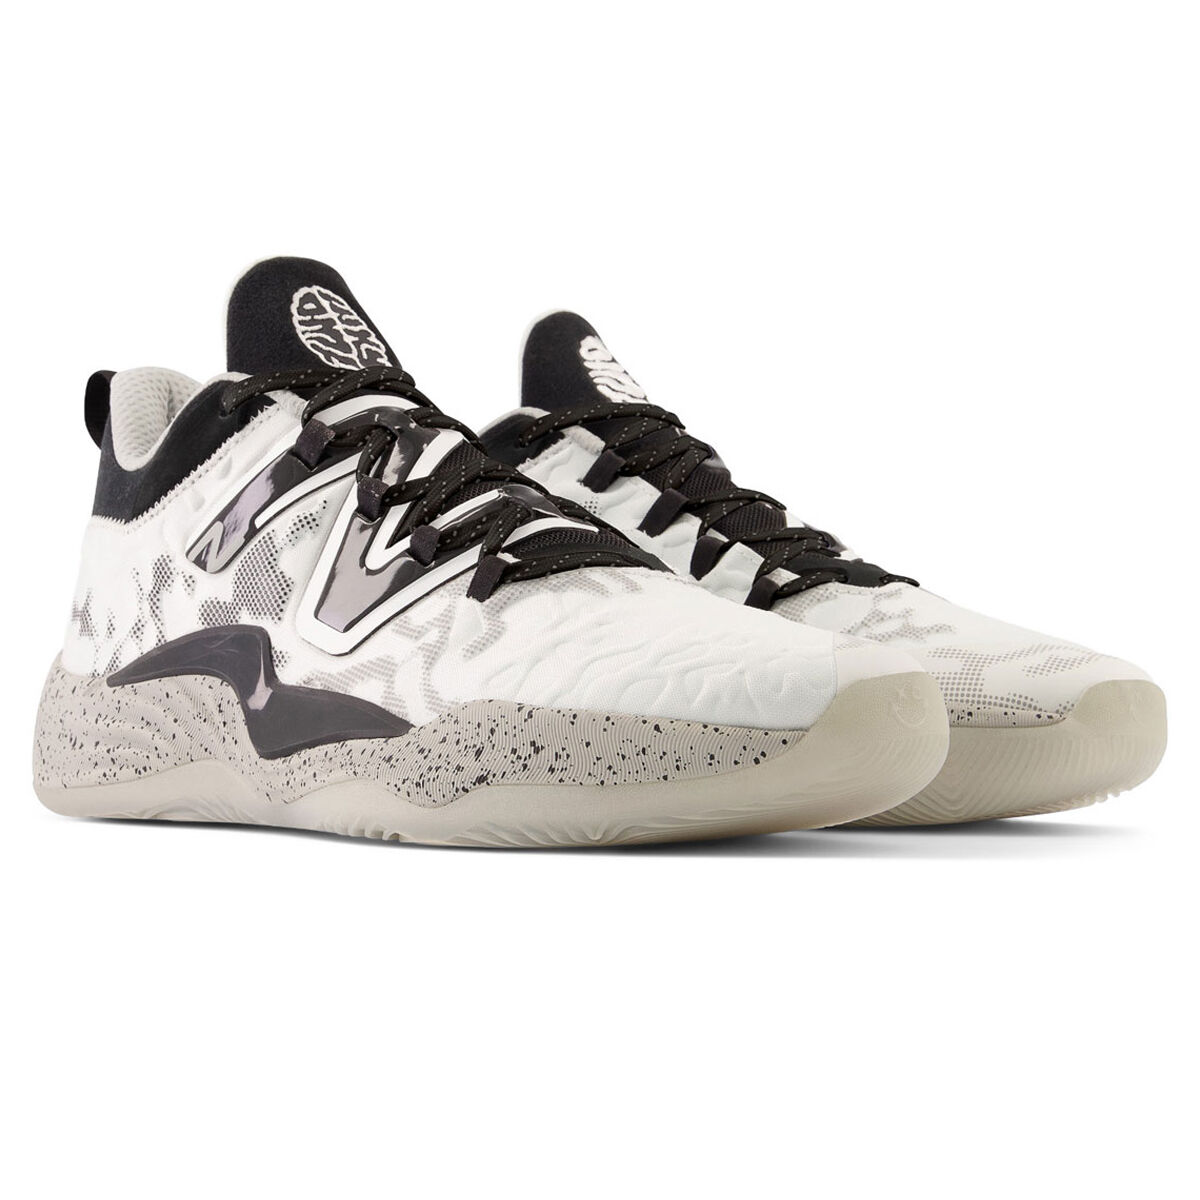 New Balance Two WXY V3 Essentials Basketball Shoes White/Black US